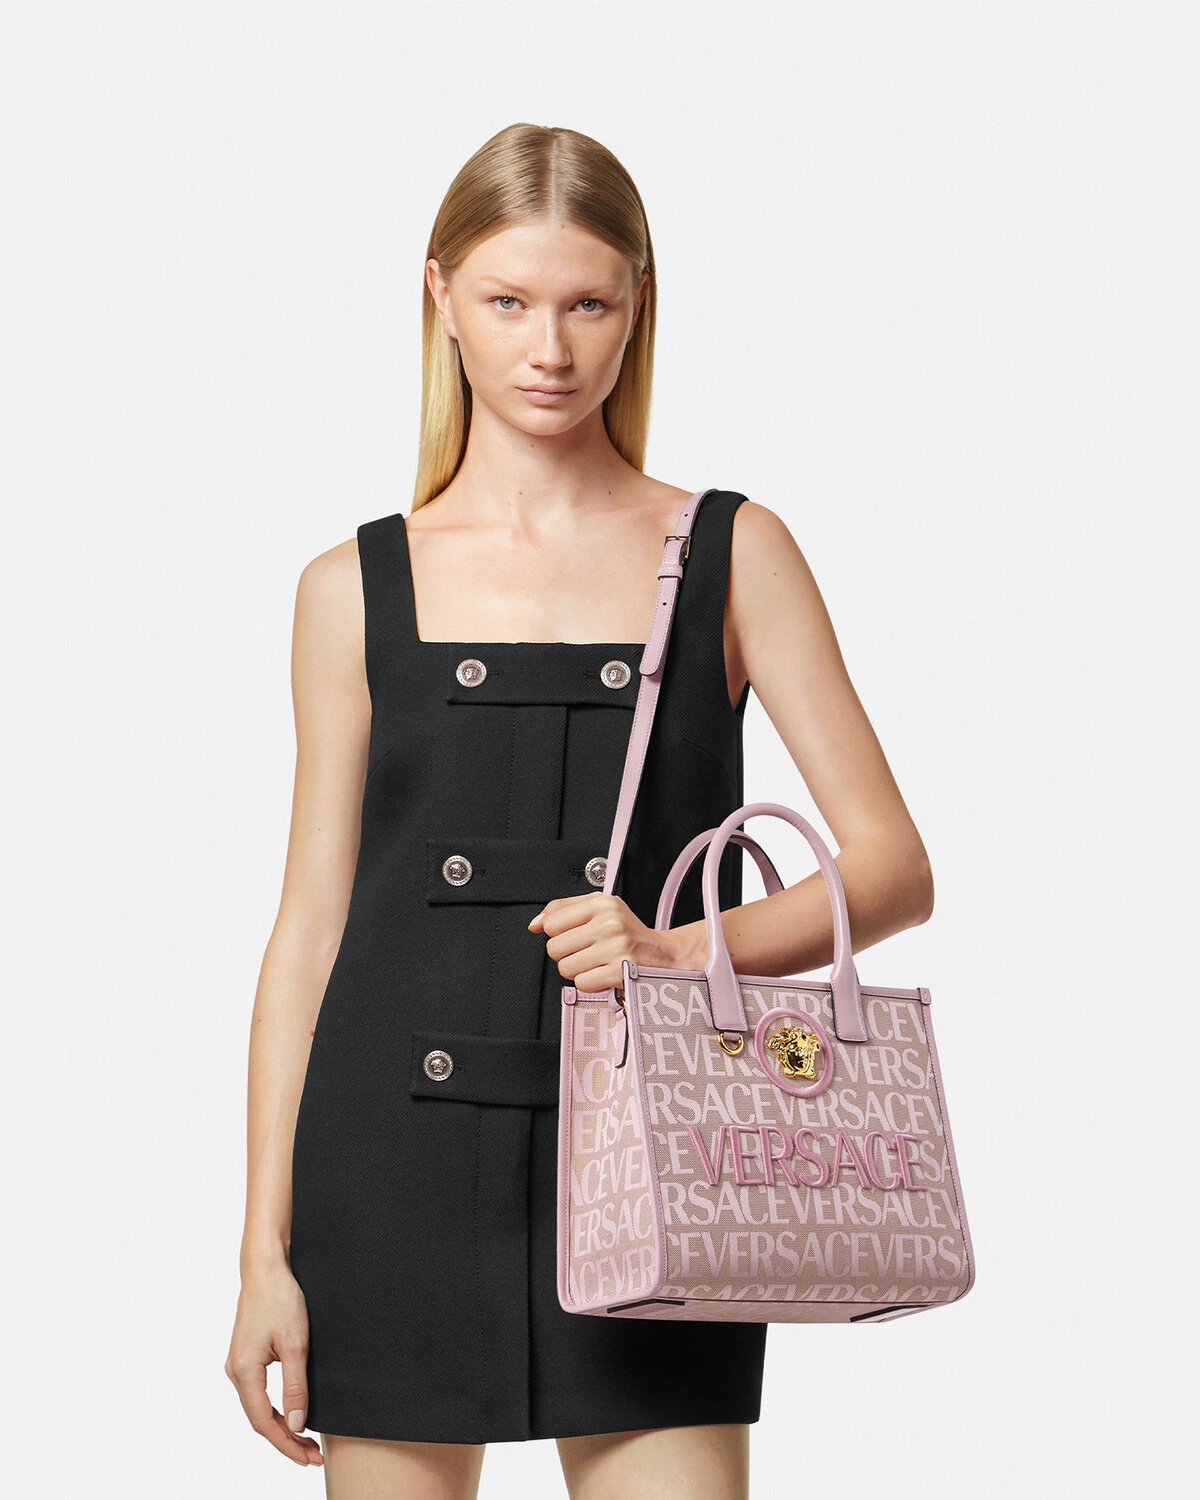 Versace Allover Large Tote Bag